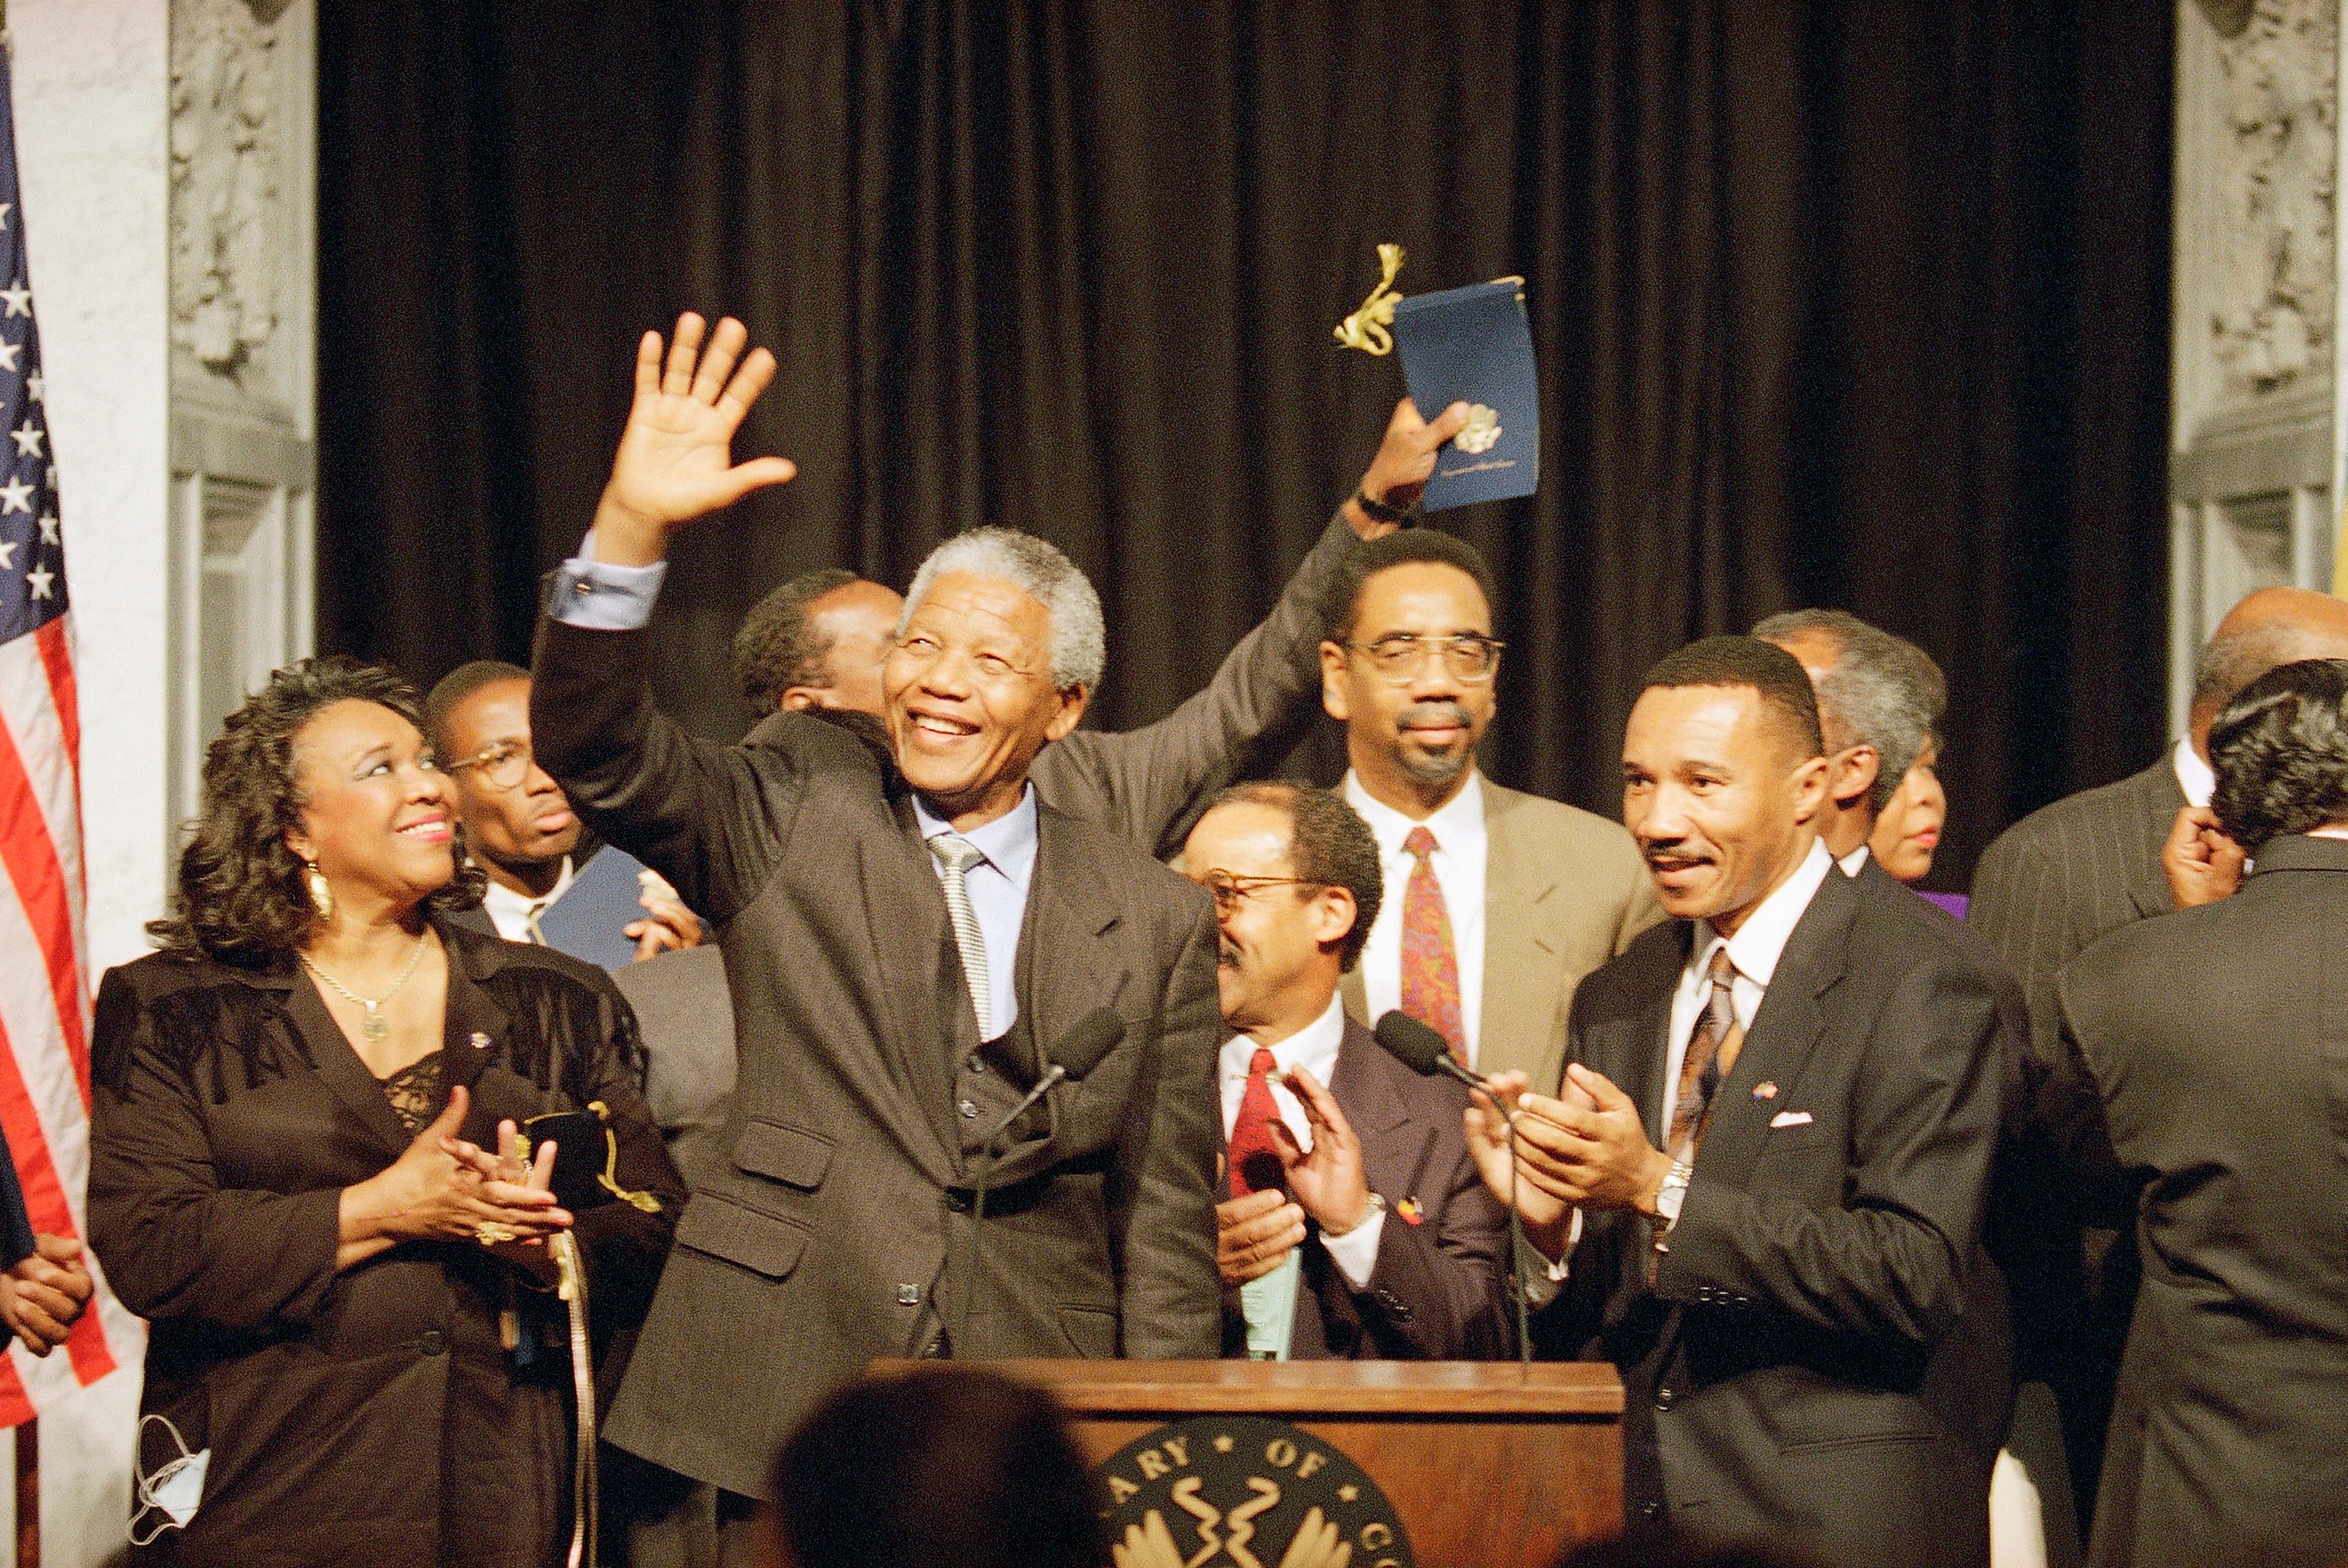 South African President Nelson Mandela gestures after a meeting with the Congressional Black Caucus on Oct. 4, 1994 on Capitol Hill, Washington. From left are Rep. Barbara-Rose Collins, D-Mich., Mandela, Rep. Bobby Rush, D-Ill., and Rep. Kweisi Mfume, D-Md., chairman of the caucus. Collins died at the age of 82, her family announced in a statement on Thursday, Nov. 4, 2021.